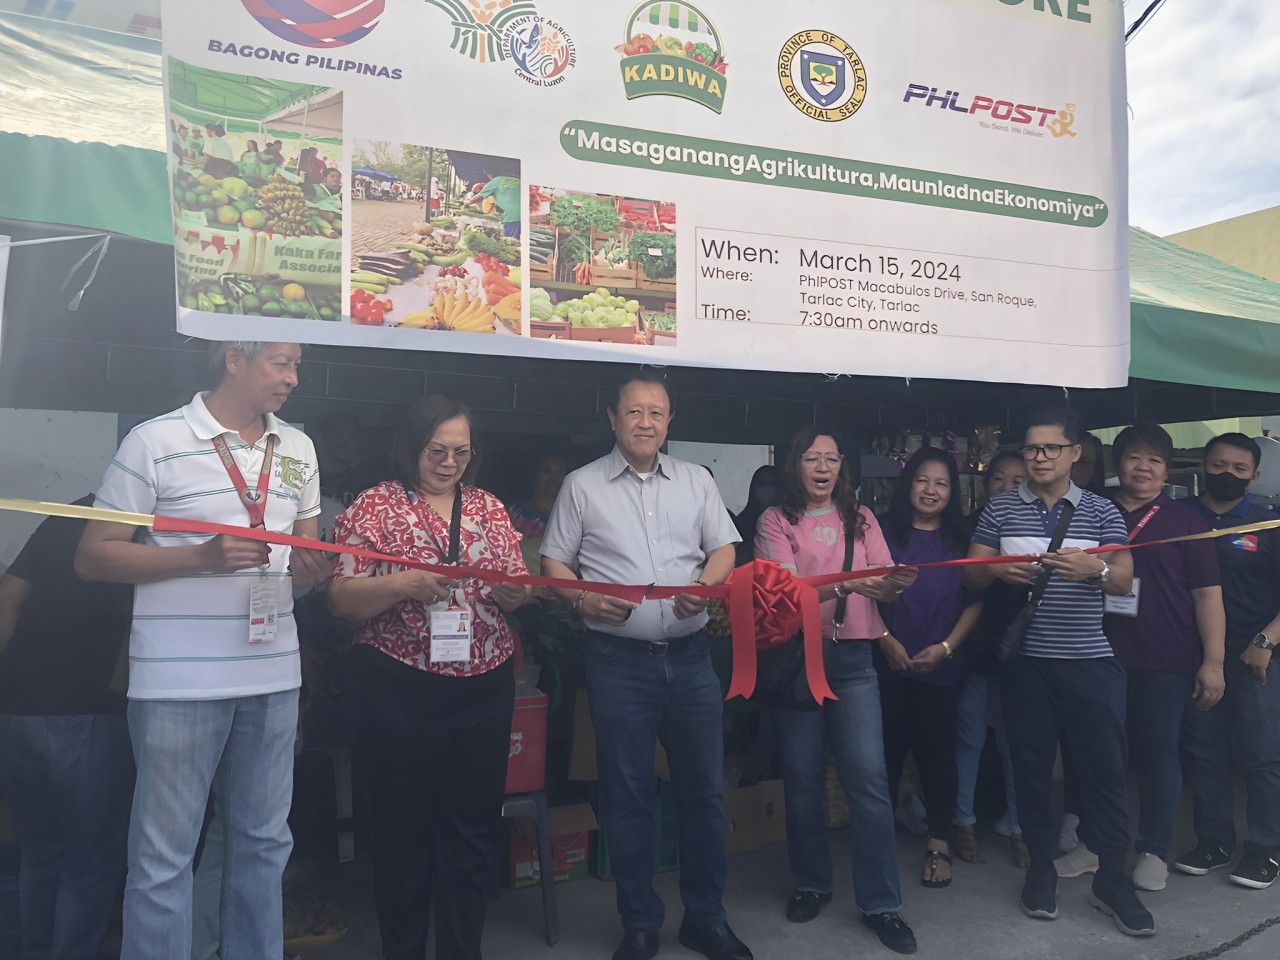 PHLPost expand Kadiwa pop-up store to other post offices